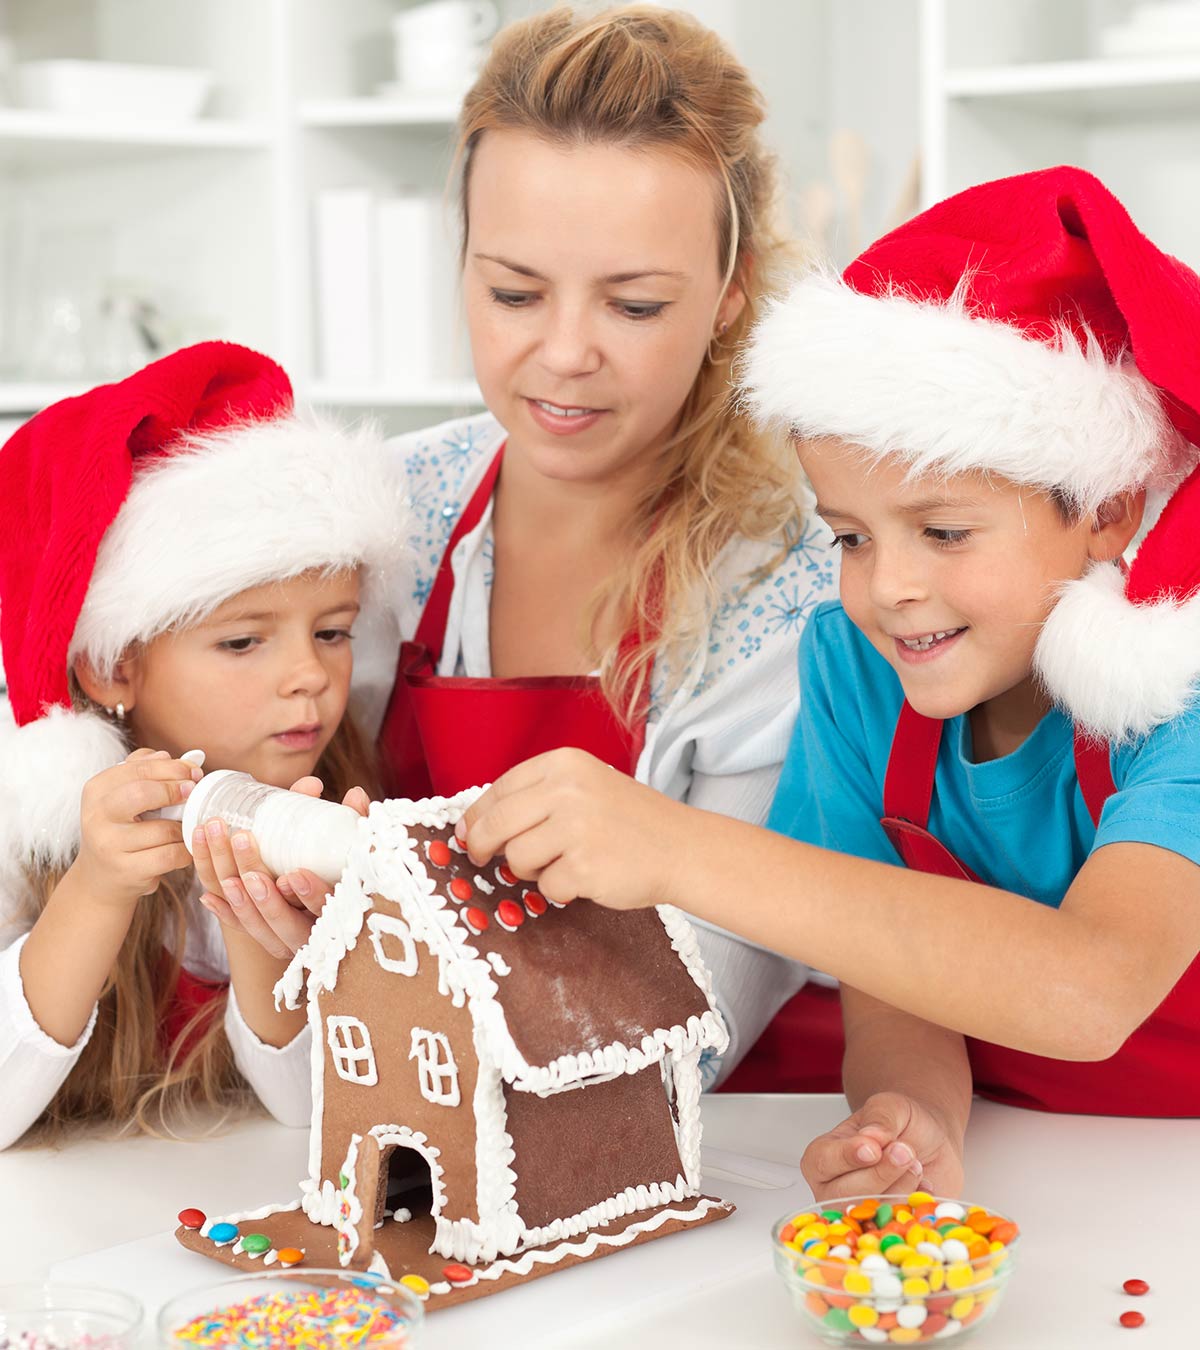 15 Healthy And Simple Christmas Recipes For Kids